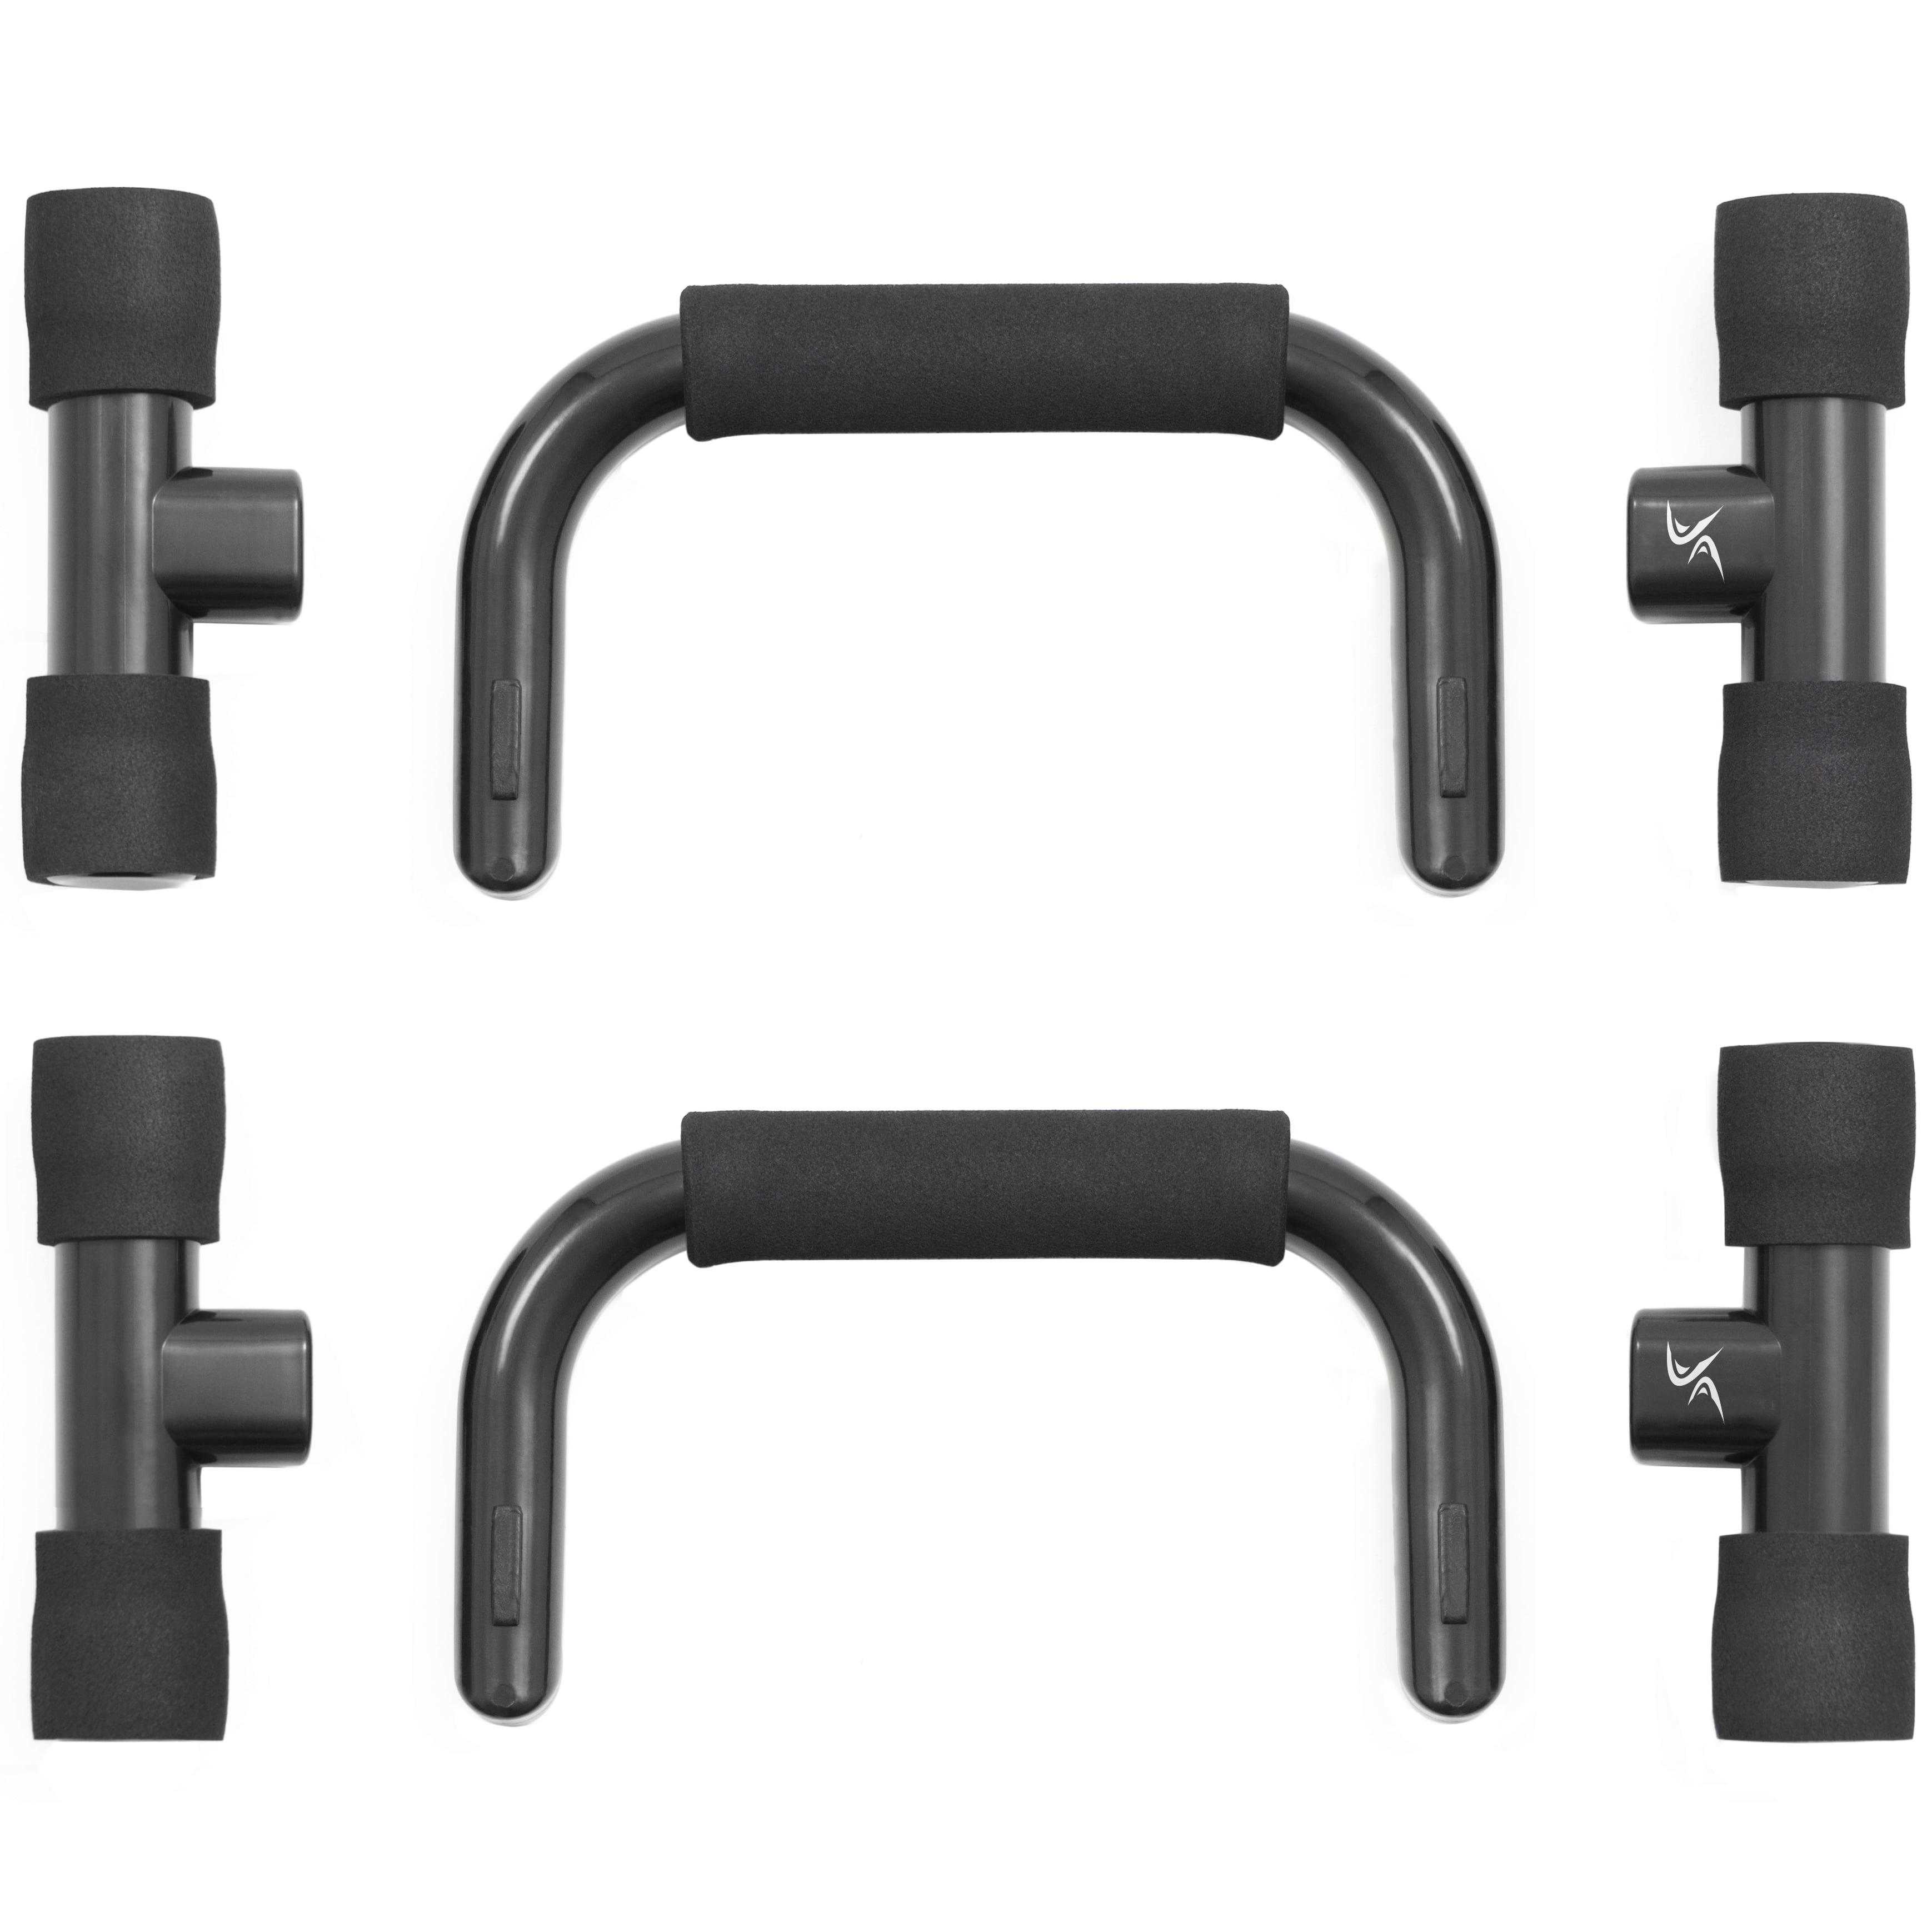 ProSource Push-up Bars Handles With Cushioned Foam Grips and Slip Resistant Base for sale online 